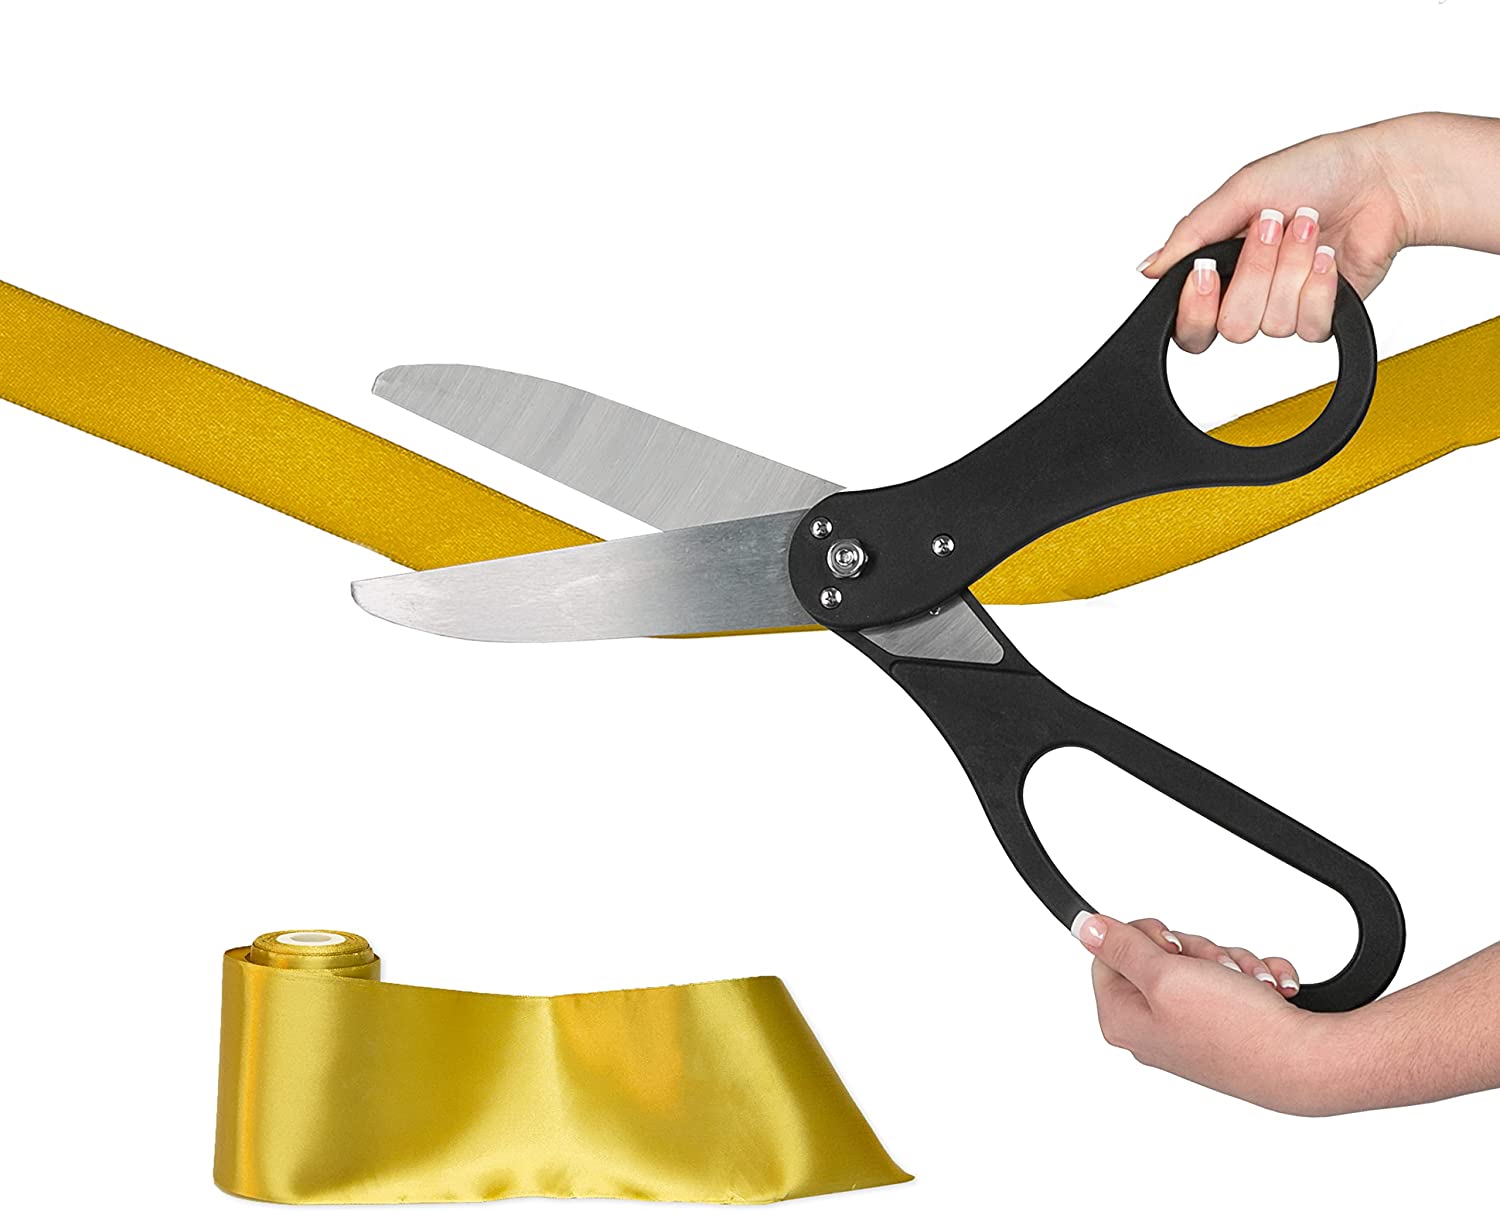 Crutello Giant Ribbon Cutting Ceremony Kit 21" Giant Scissor Set with Sharp, Black Handled Durable XL Scissors, and 30 Feet of Oversized 4" Wide Gold Ribbon